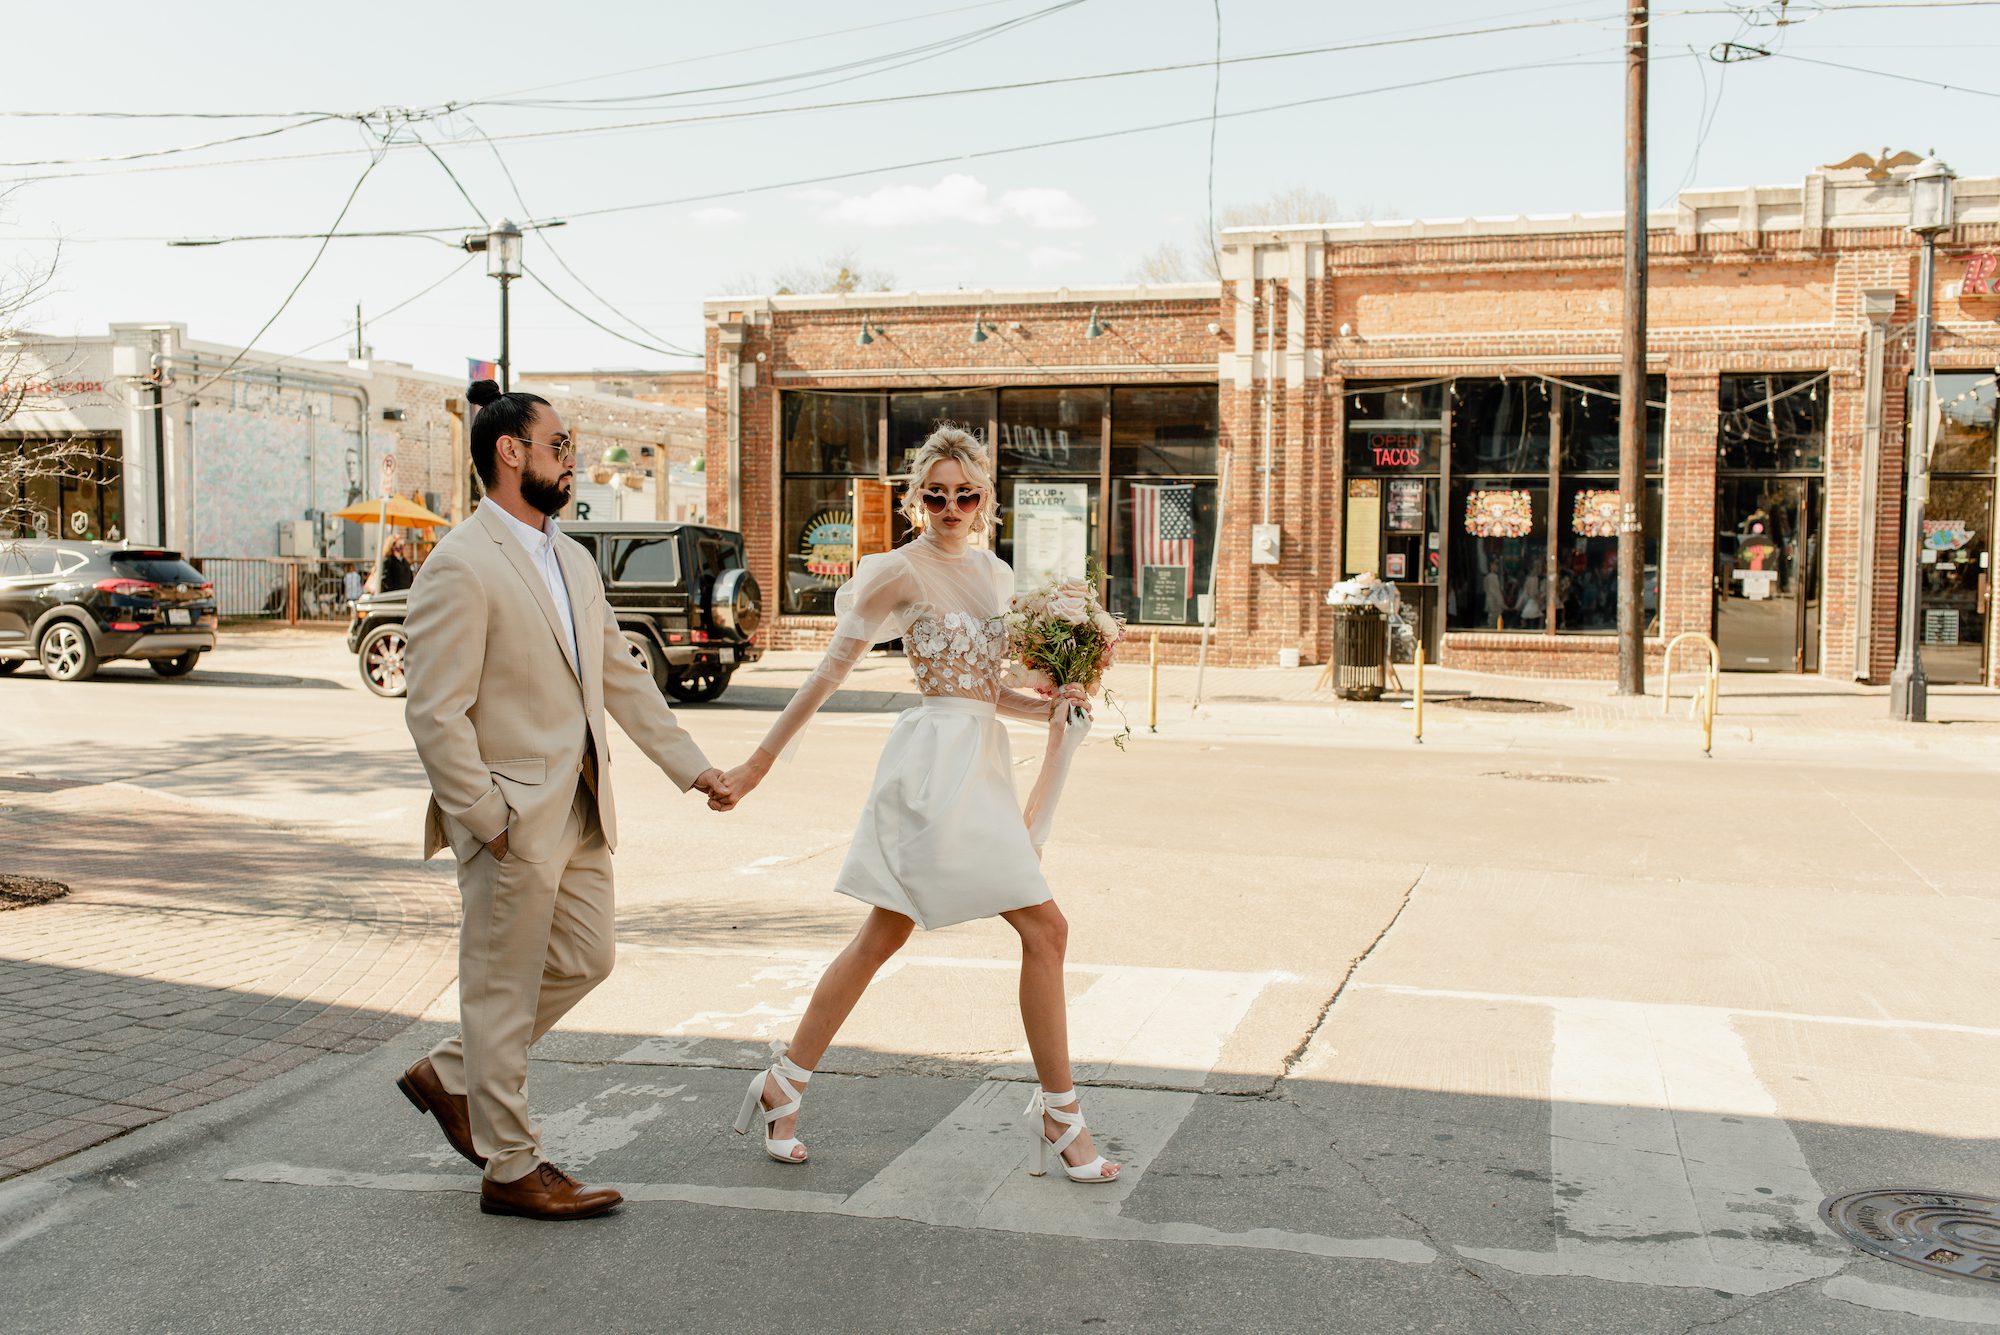 Annika Stacey - Couple in crosswalk after eloping